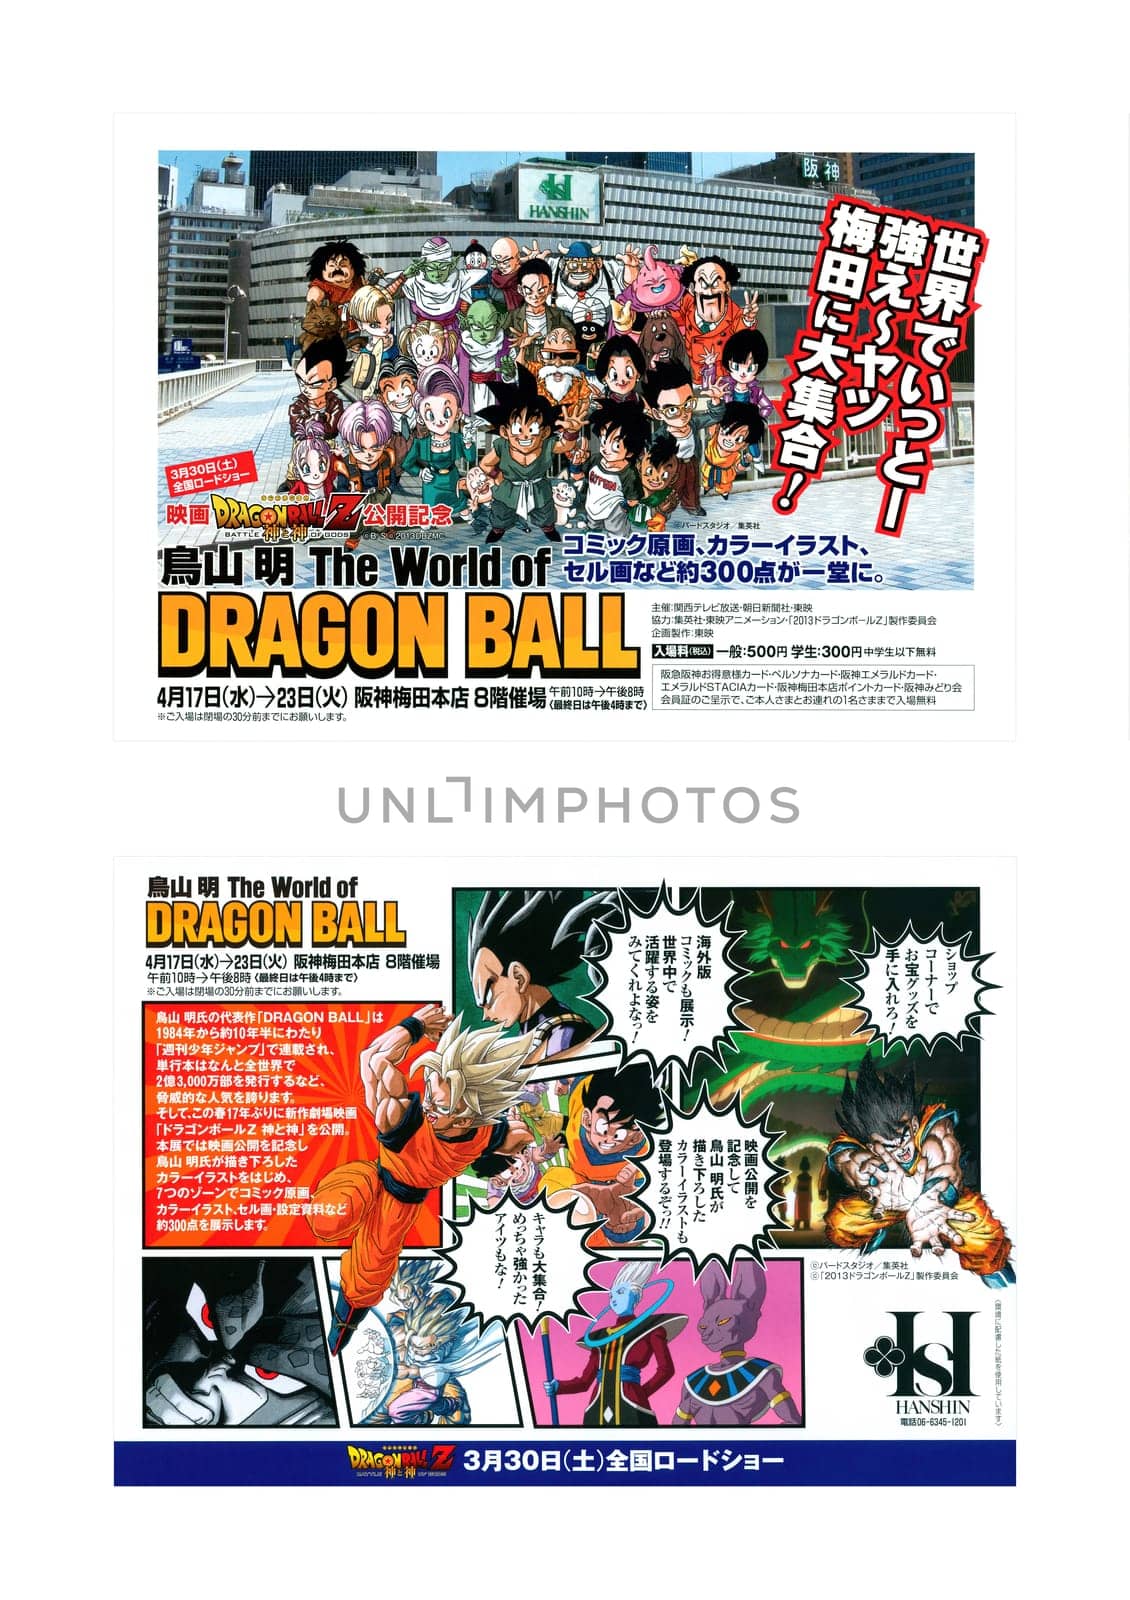 osaka, japan - apr 17 2013: Double-sided leaflet of the "Akira Toriyama The World of DRAGONBALL" exhibition commemorating the premiere of the anime movie "Dragon Ball Z: Battle of Gods". (left: front)